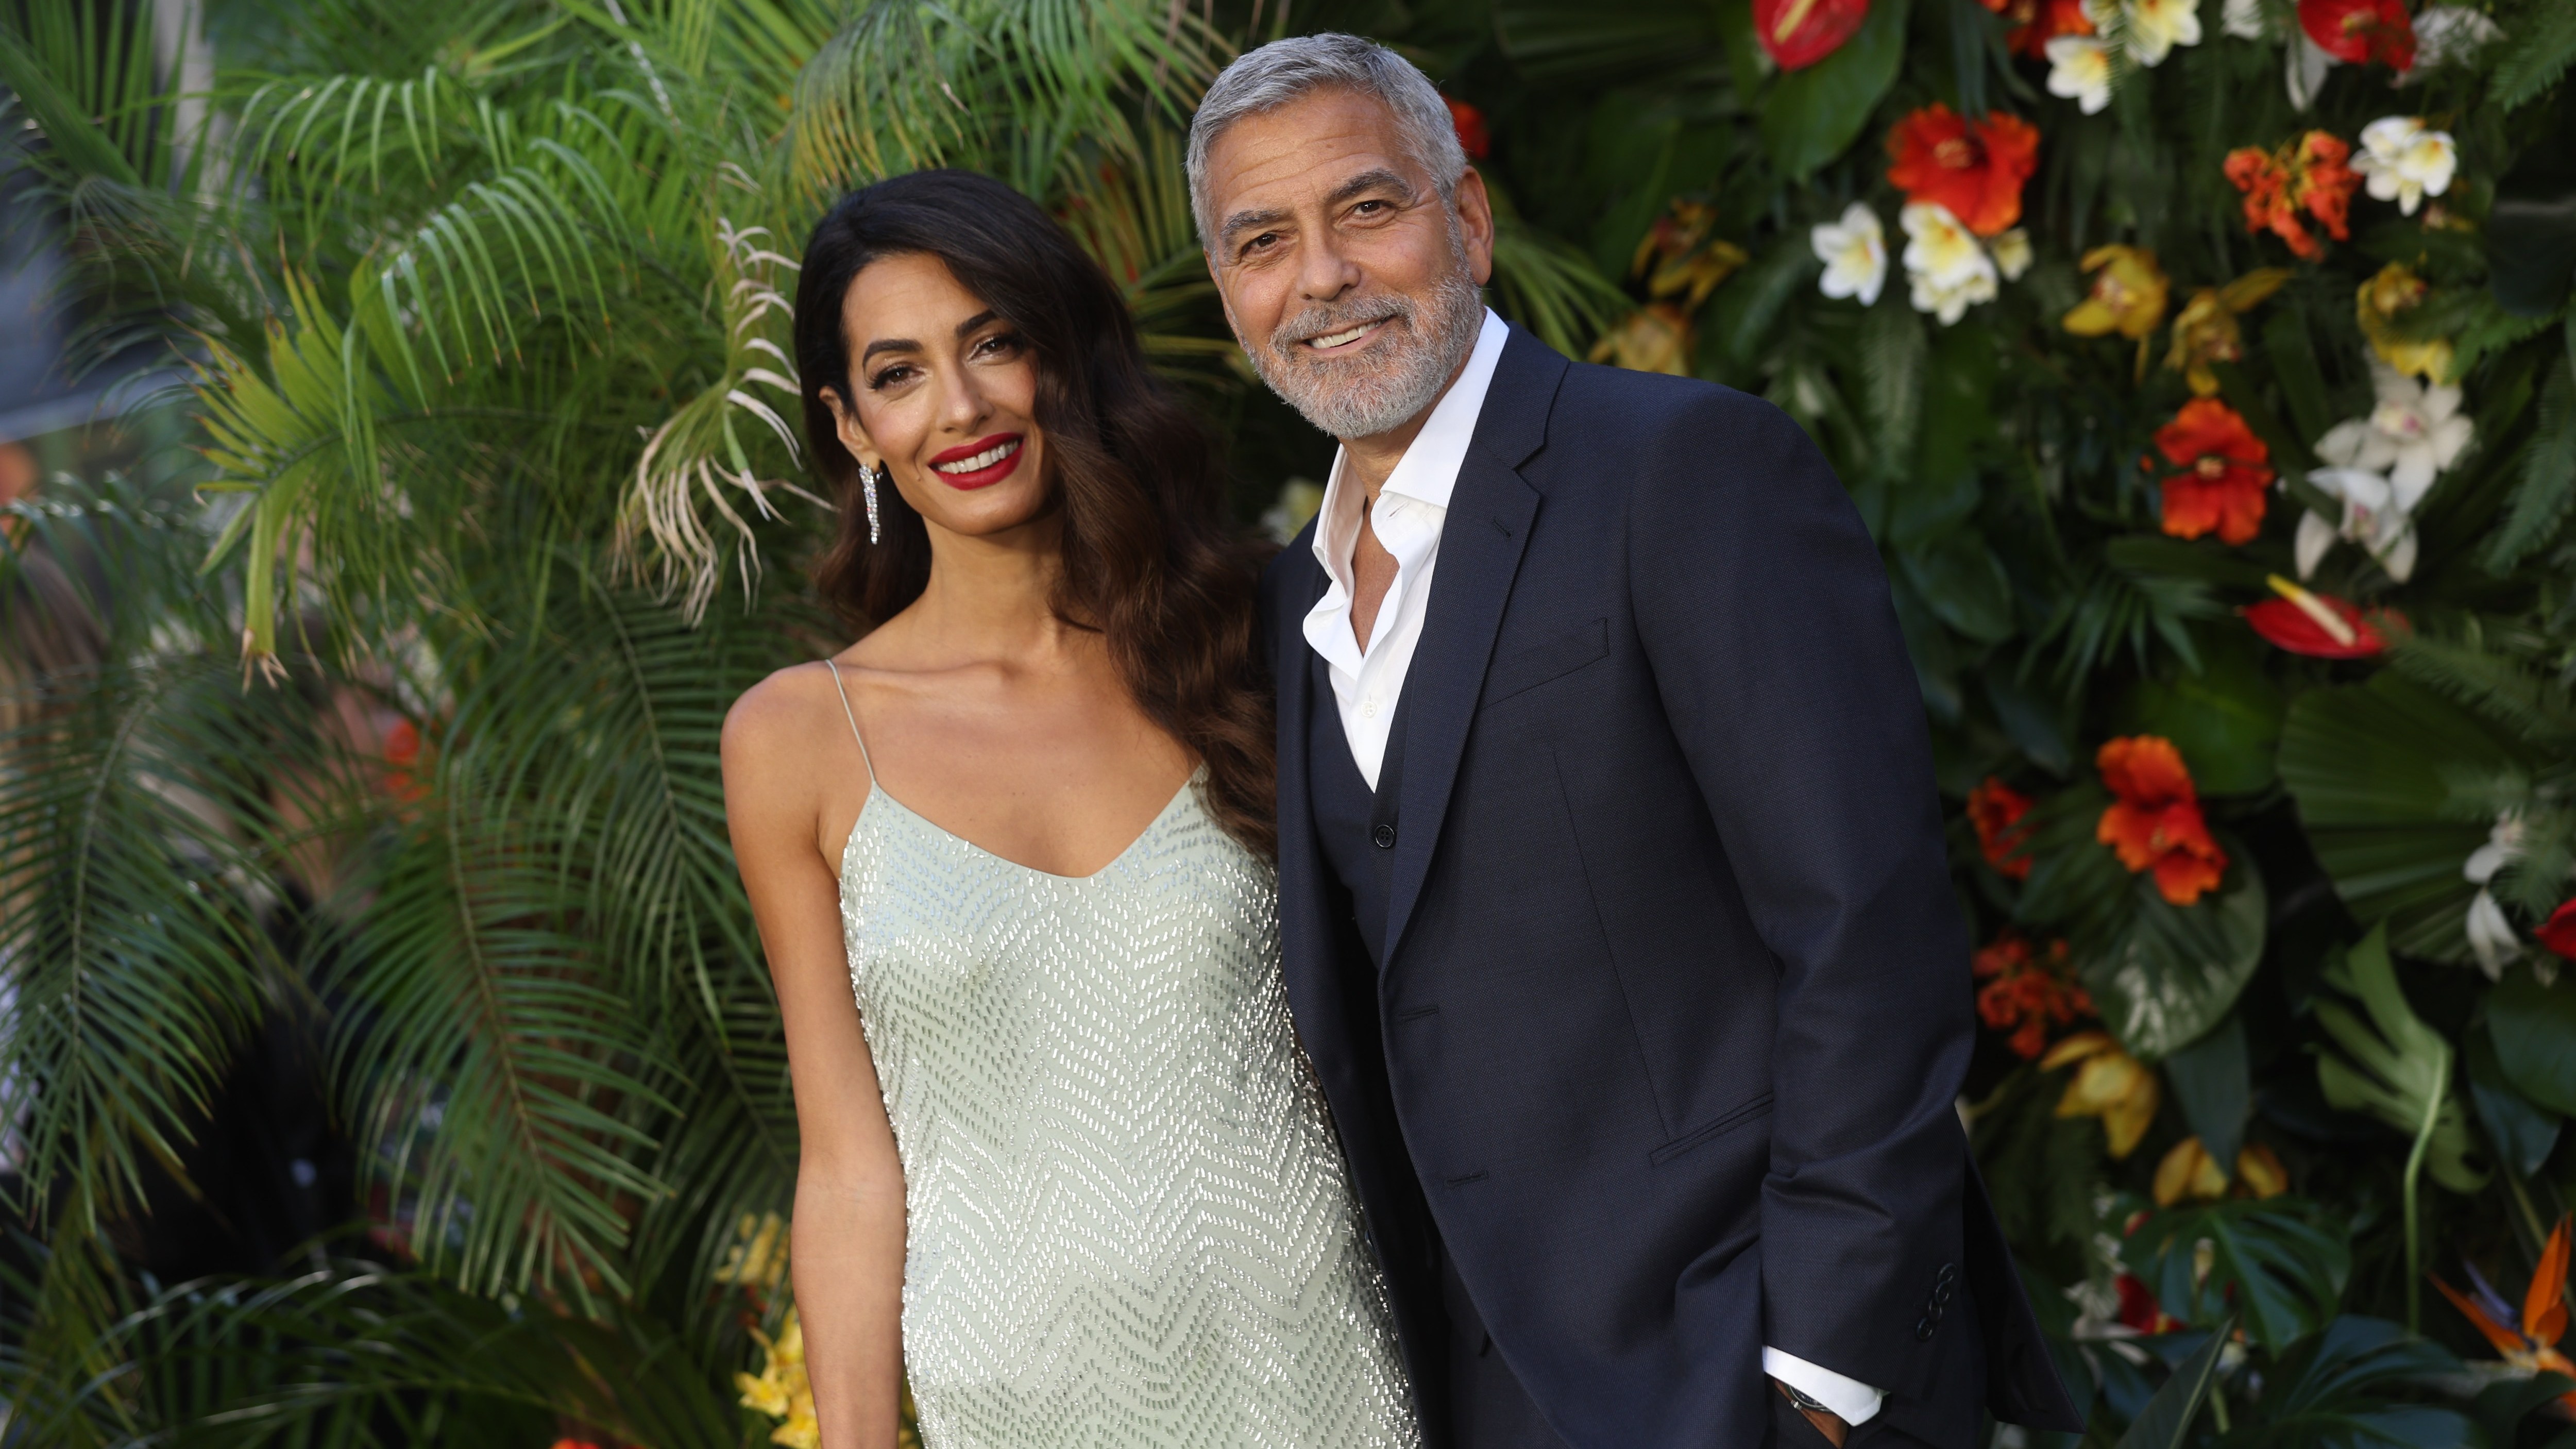 Amal Clooney is an adviser to the British barrister who asked the ICC to approve arrrest warrants for Binyamin Netanyahu. George Clooney called President Biden about the case